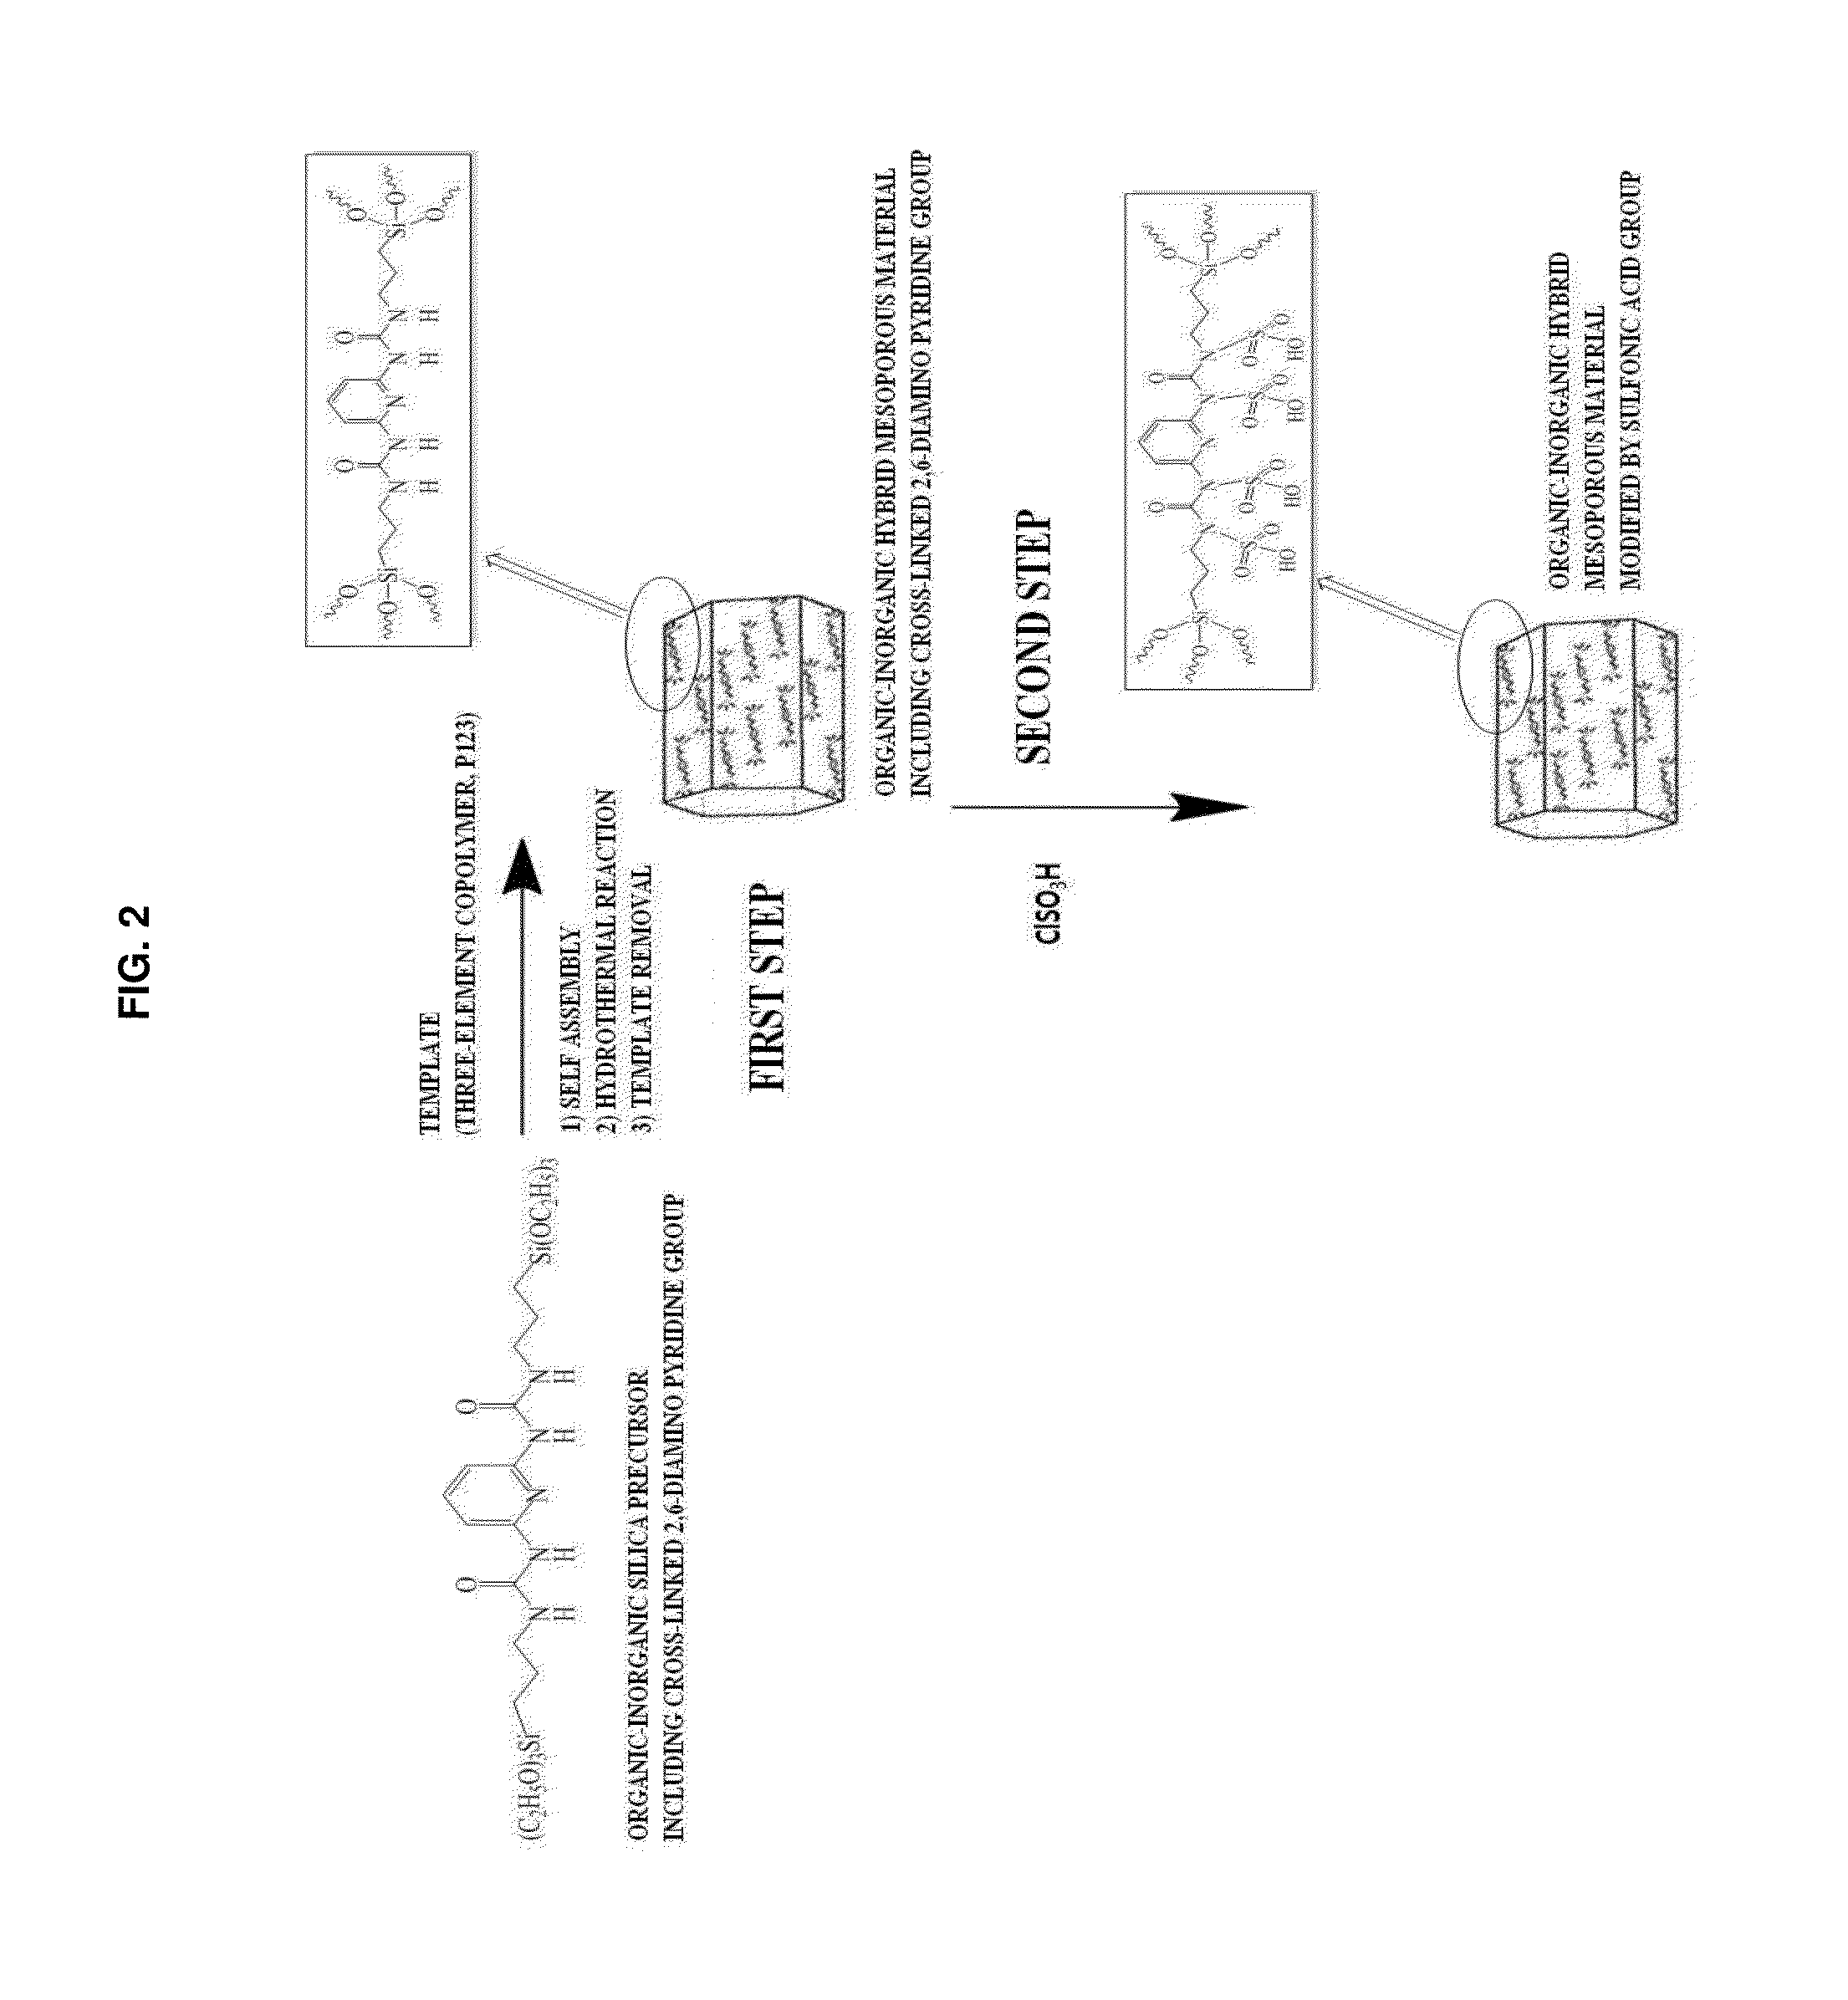 Organic-Inorganic Hybrid Mesoporous Silica Material Modified by Sulfonic Acid Group for Selective Adsorption of Metal Ions and Method of Manufacturing the Same